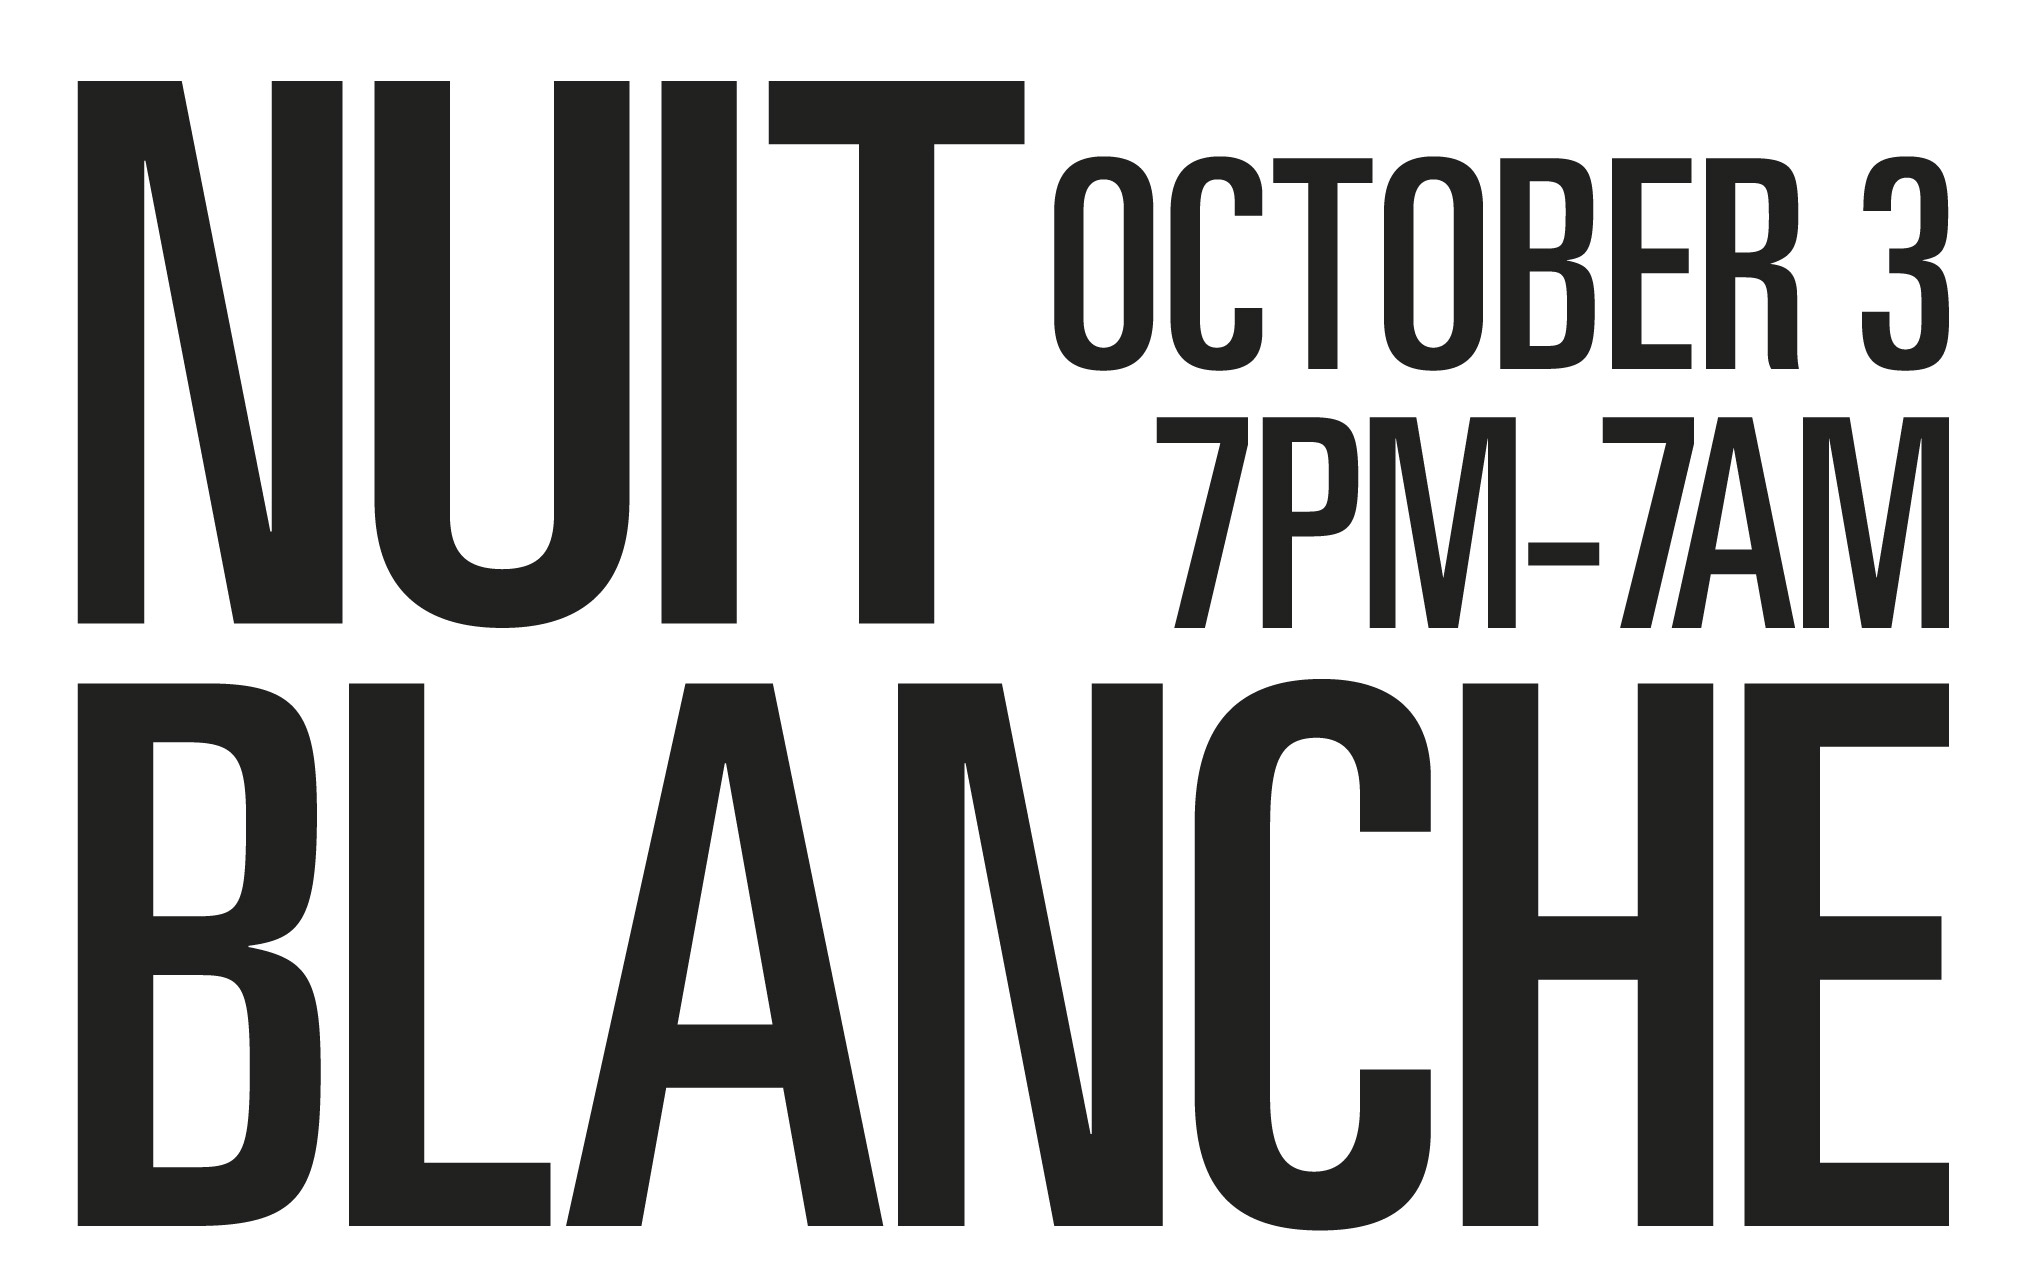 Nuit Blanche October 3 7 pm - 7 am